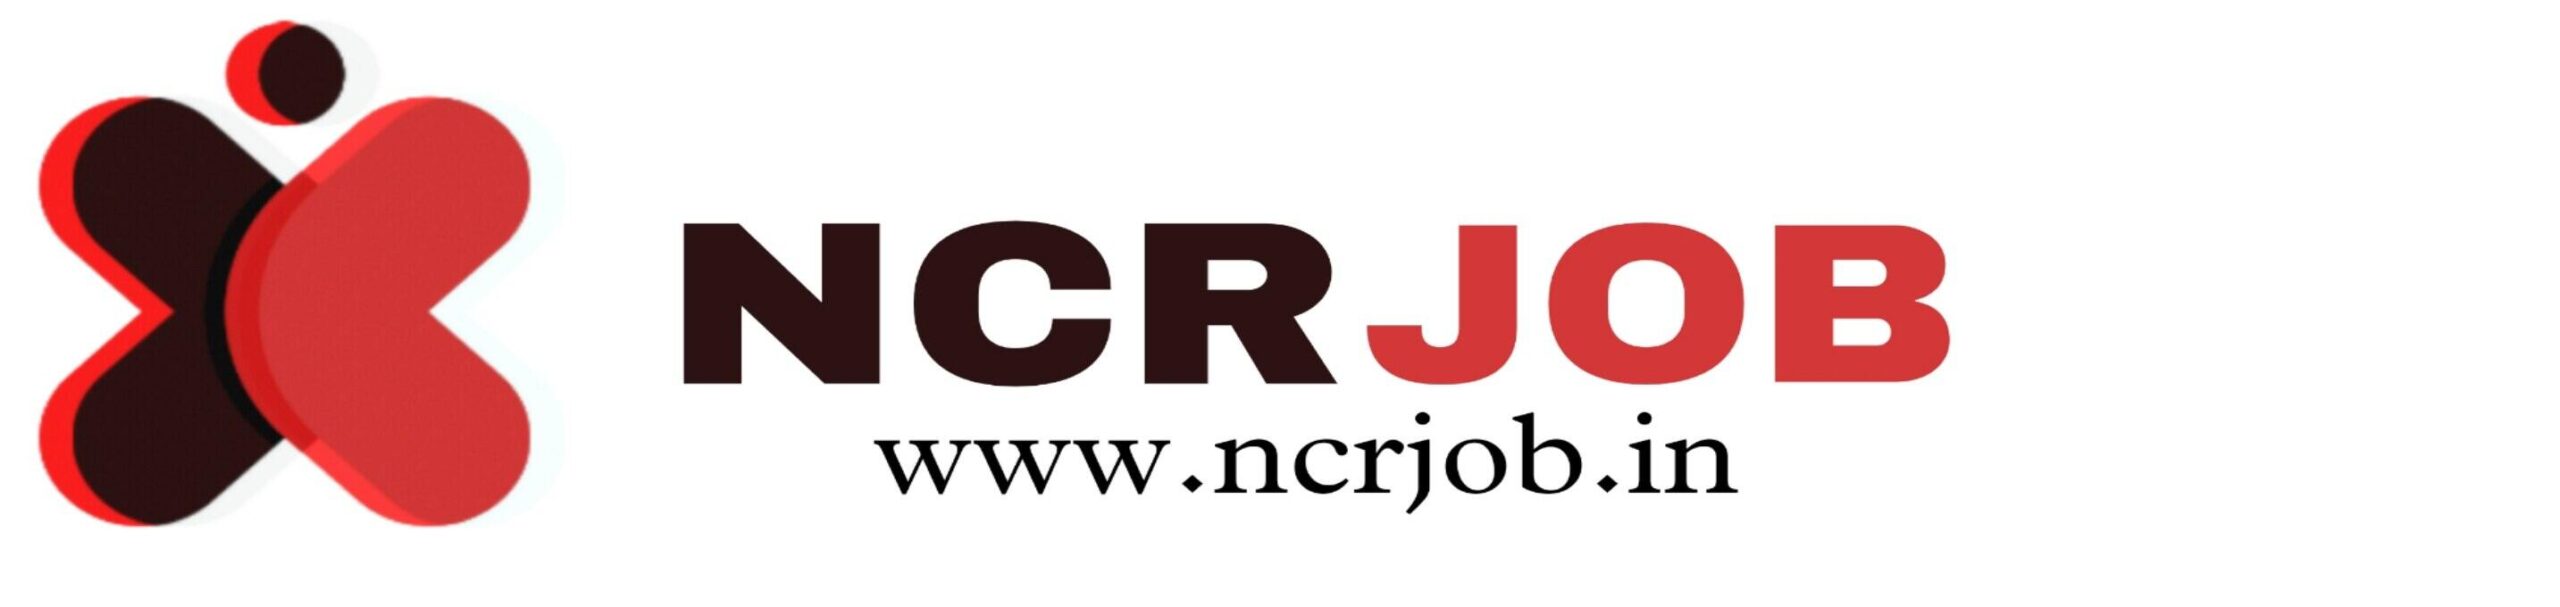 ncrjob.in